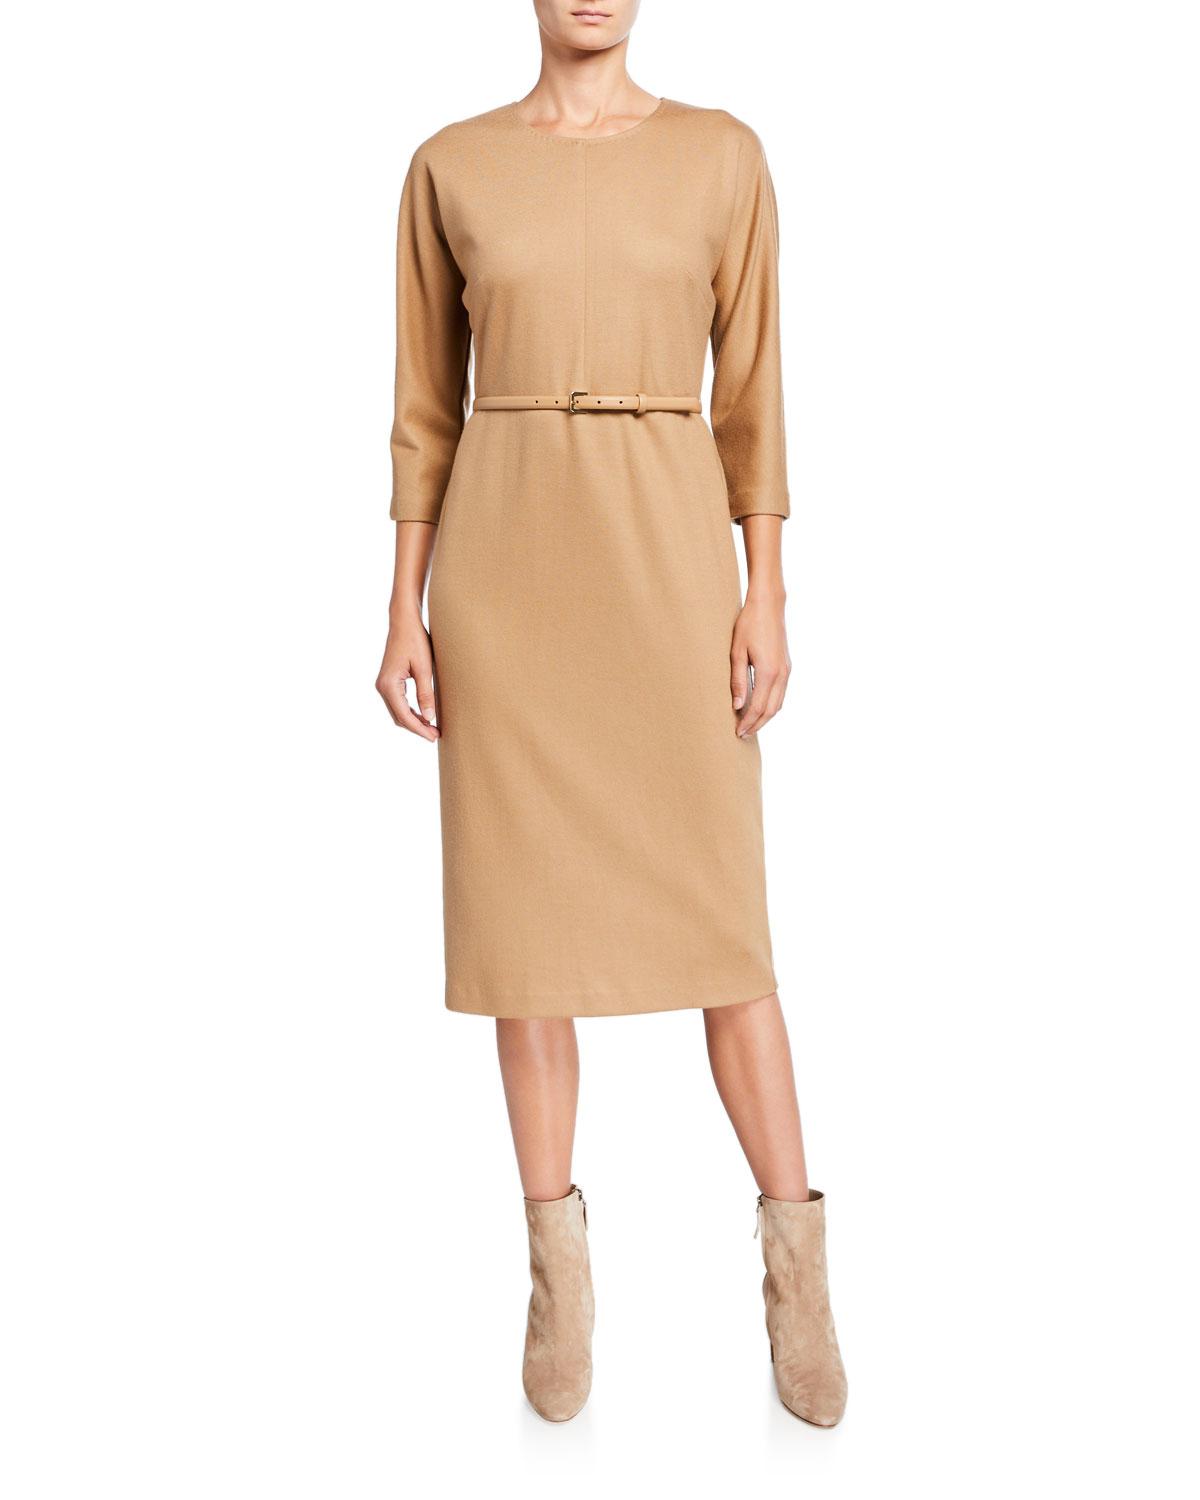 Max Mara 3/4-sleeve Wool Jersey Dress in Camel (Natural) - Lyst